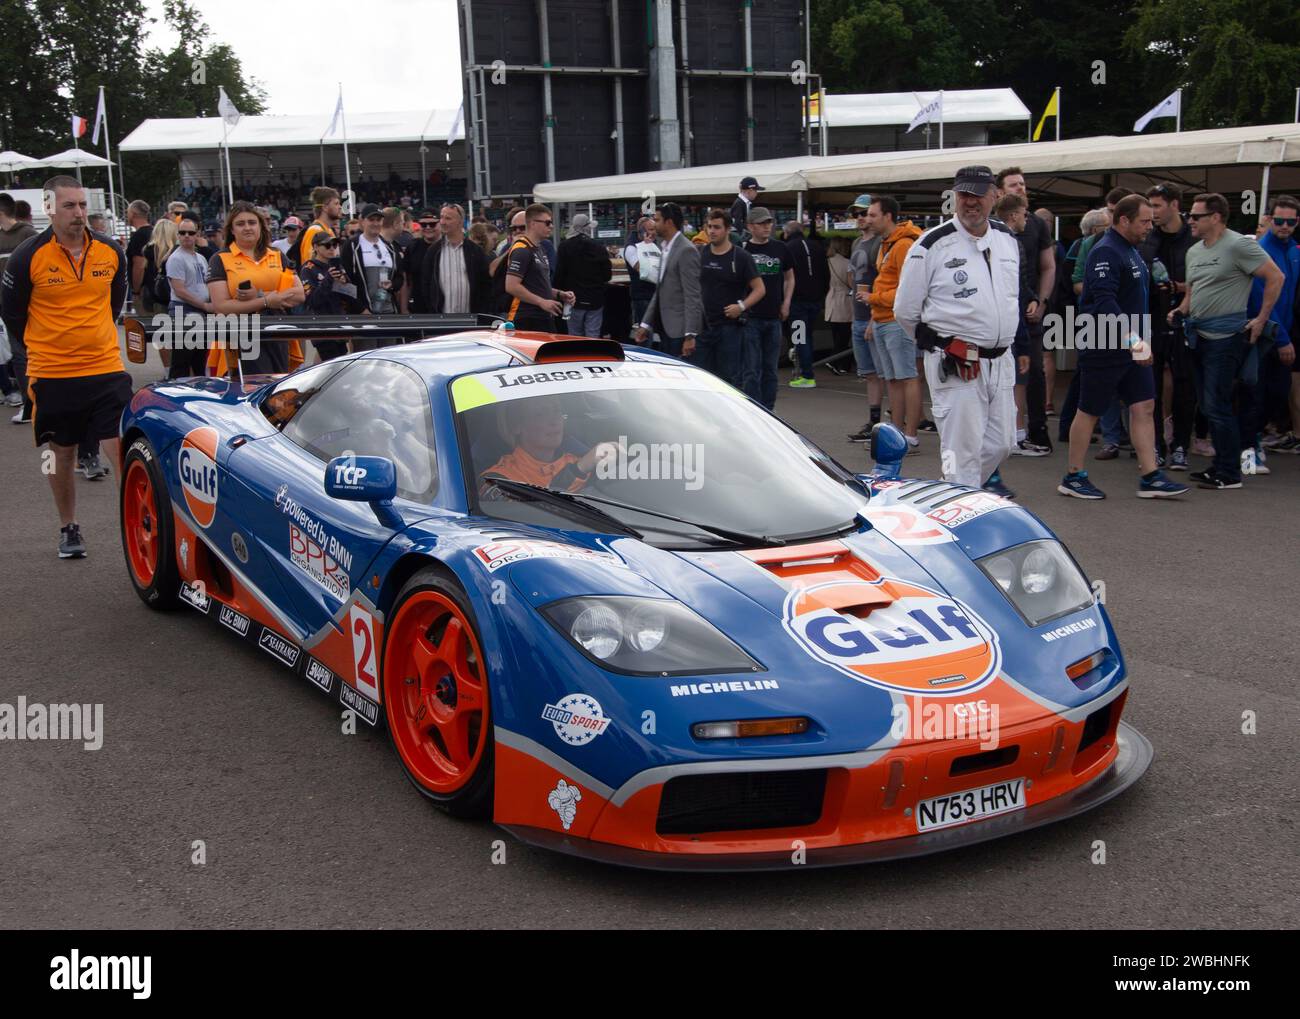 Goodwood Festival of Speed McLaren F1 GTR with Gulf livery Stock Photo